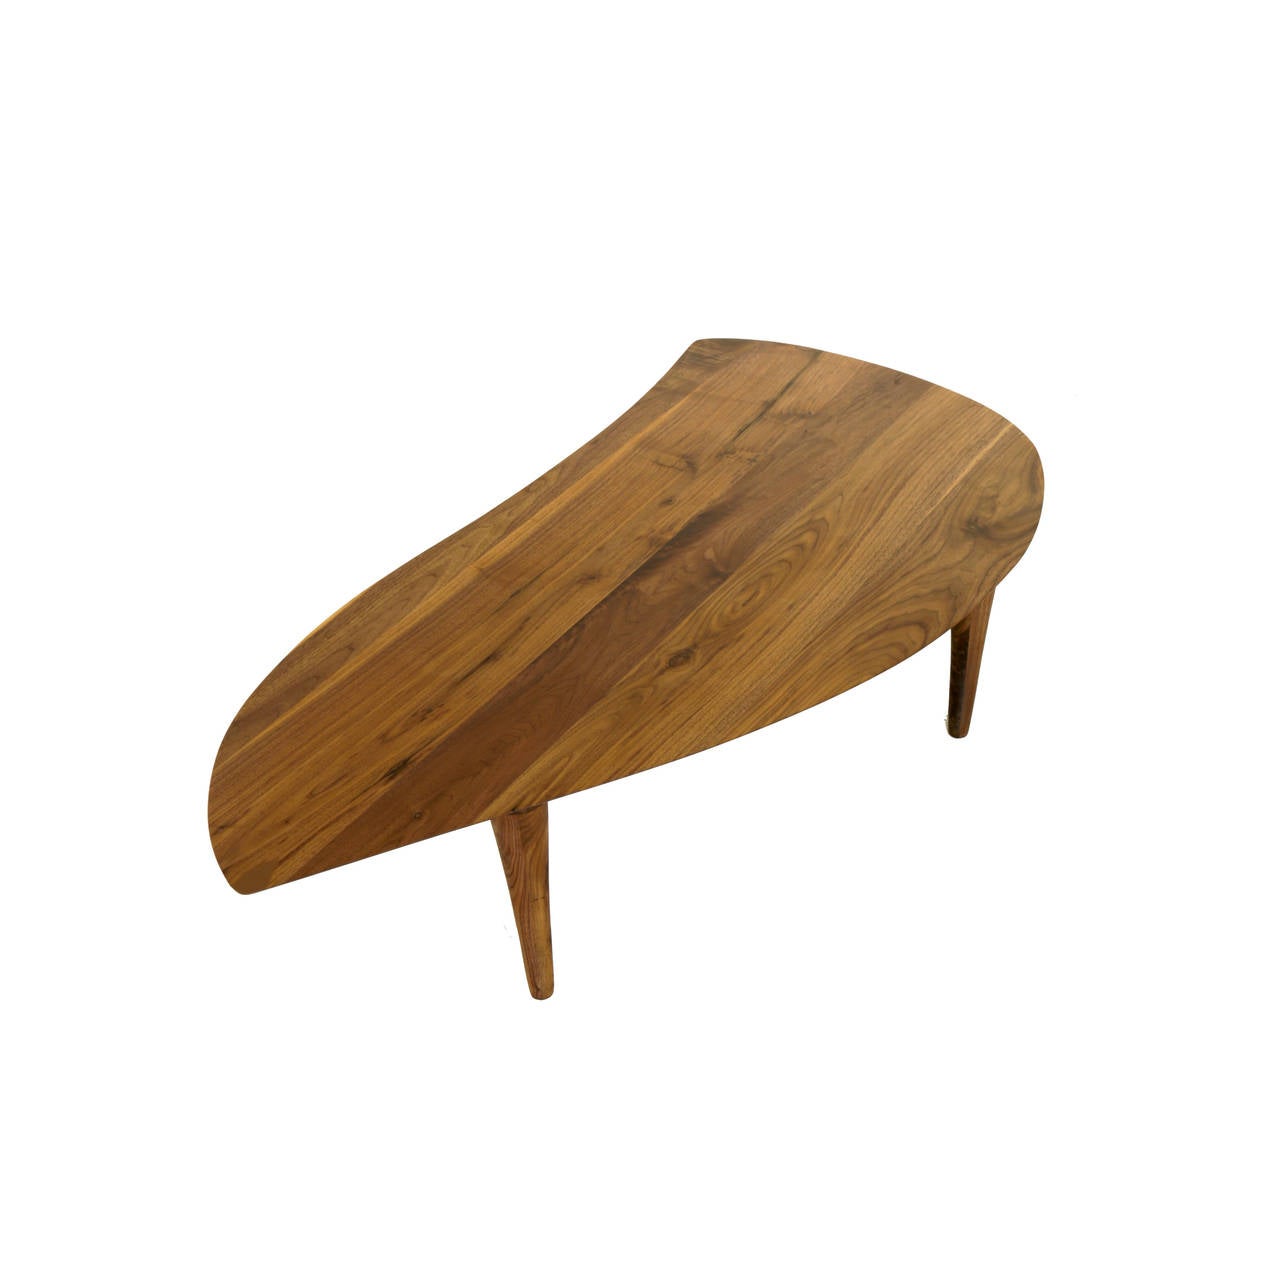 A lovely sculptural coffee table in solid walnut with elegantly curved legs in an organic leaf shape. 

Many pieces are stored in our warehouse, so please click on “Contact Dealer” button under our logo below to find out if the pieces you are